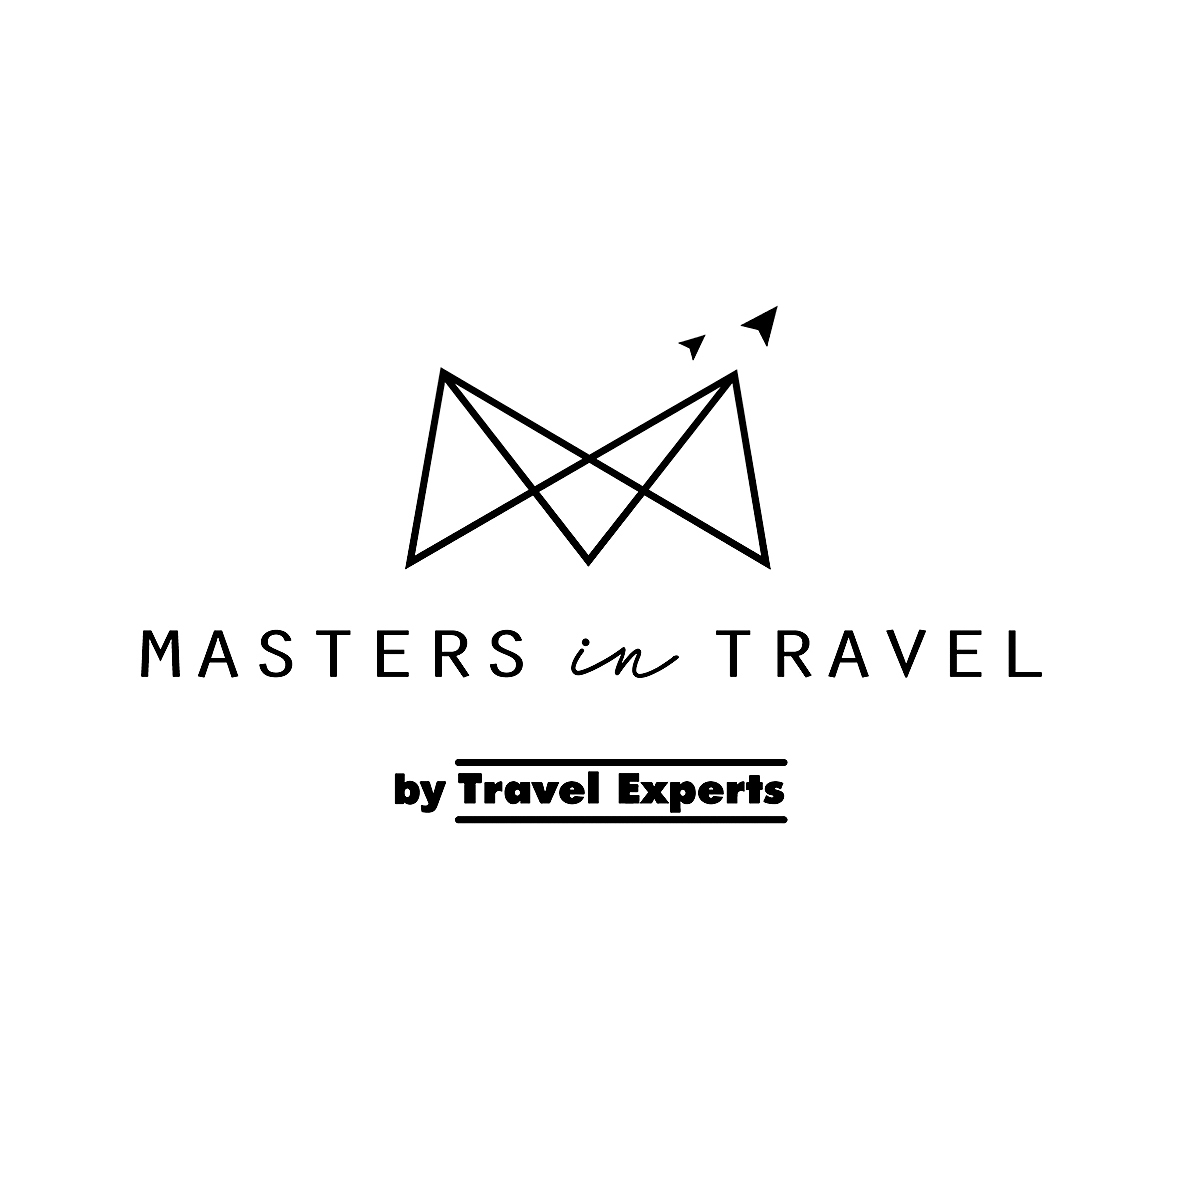 Masters in Travel